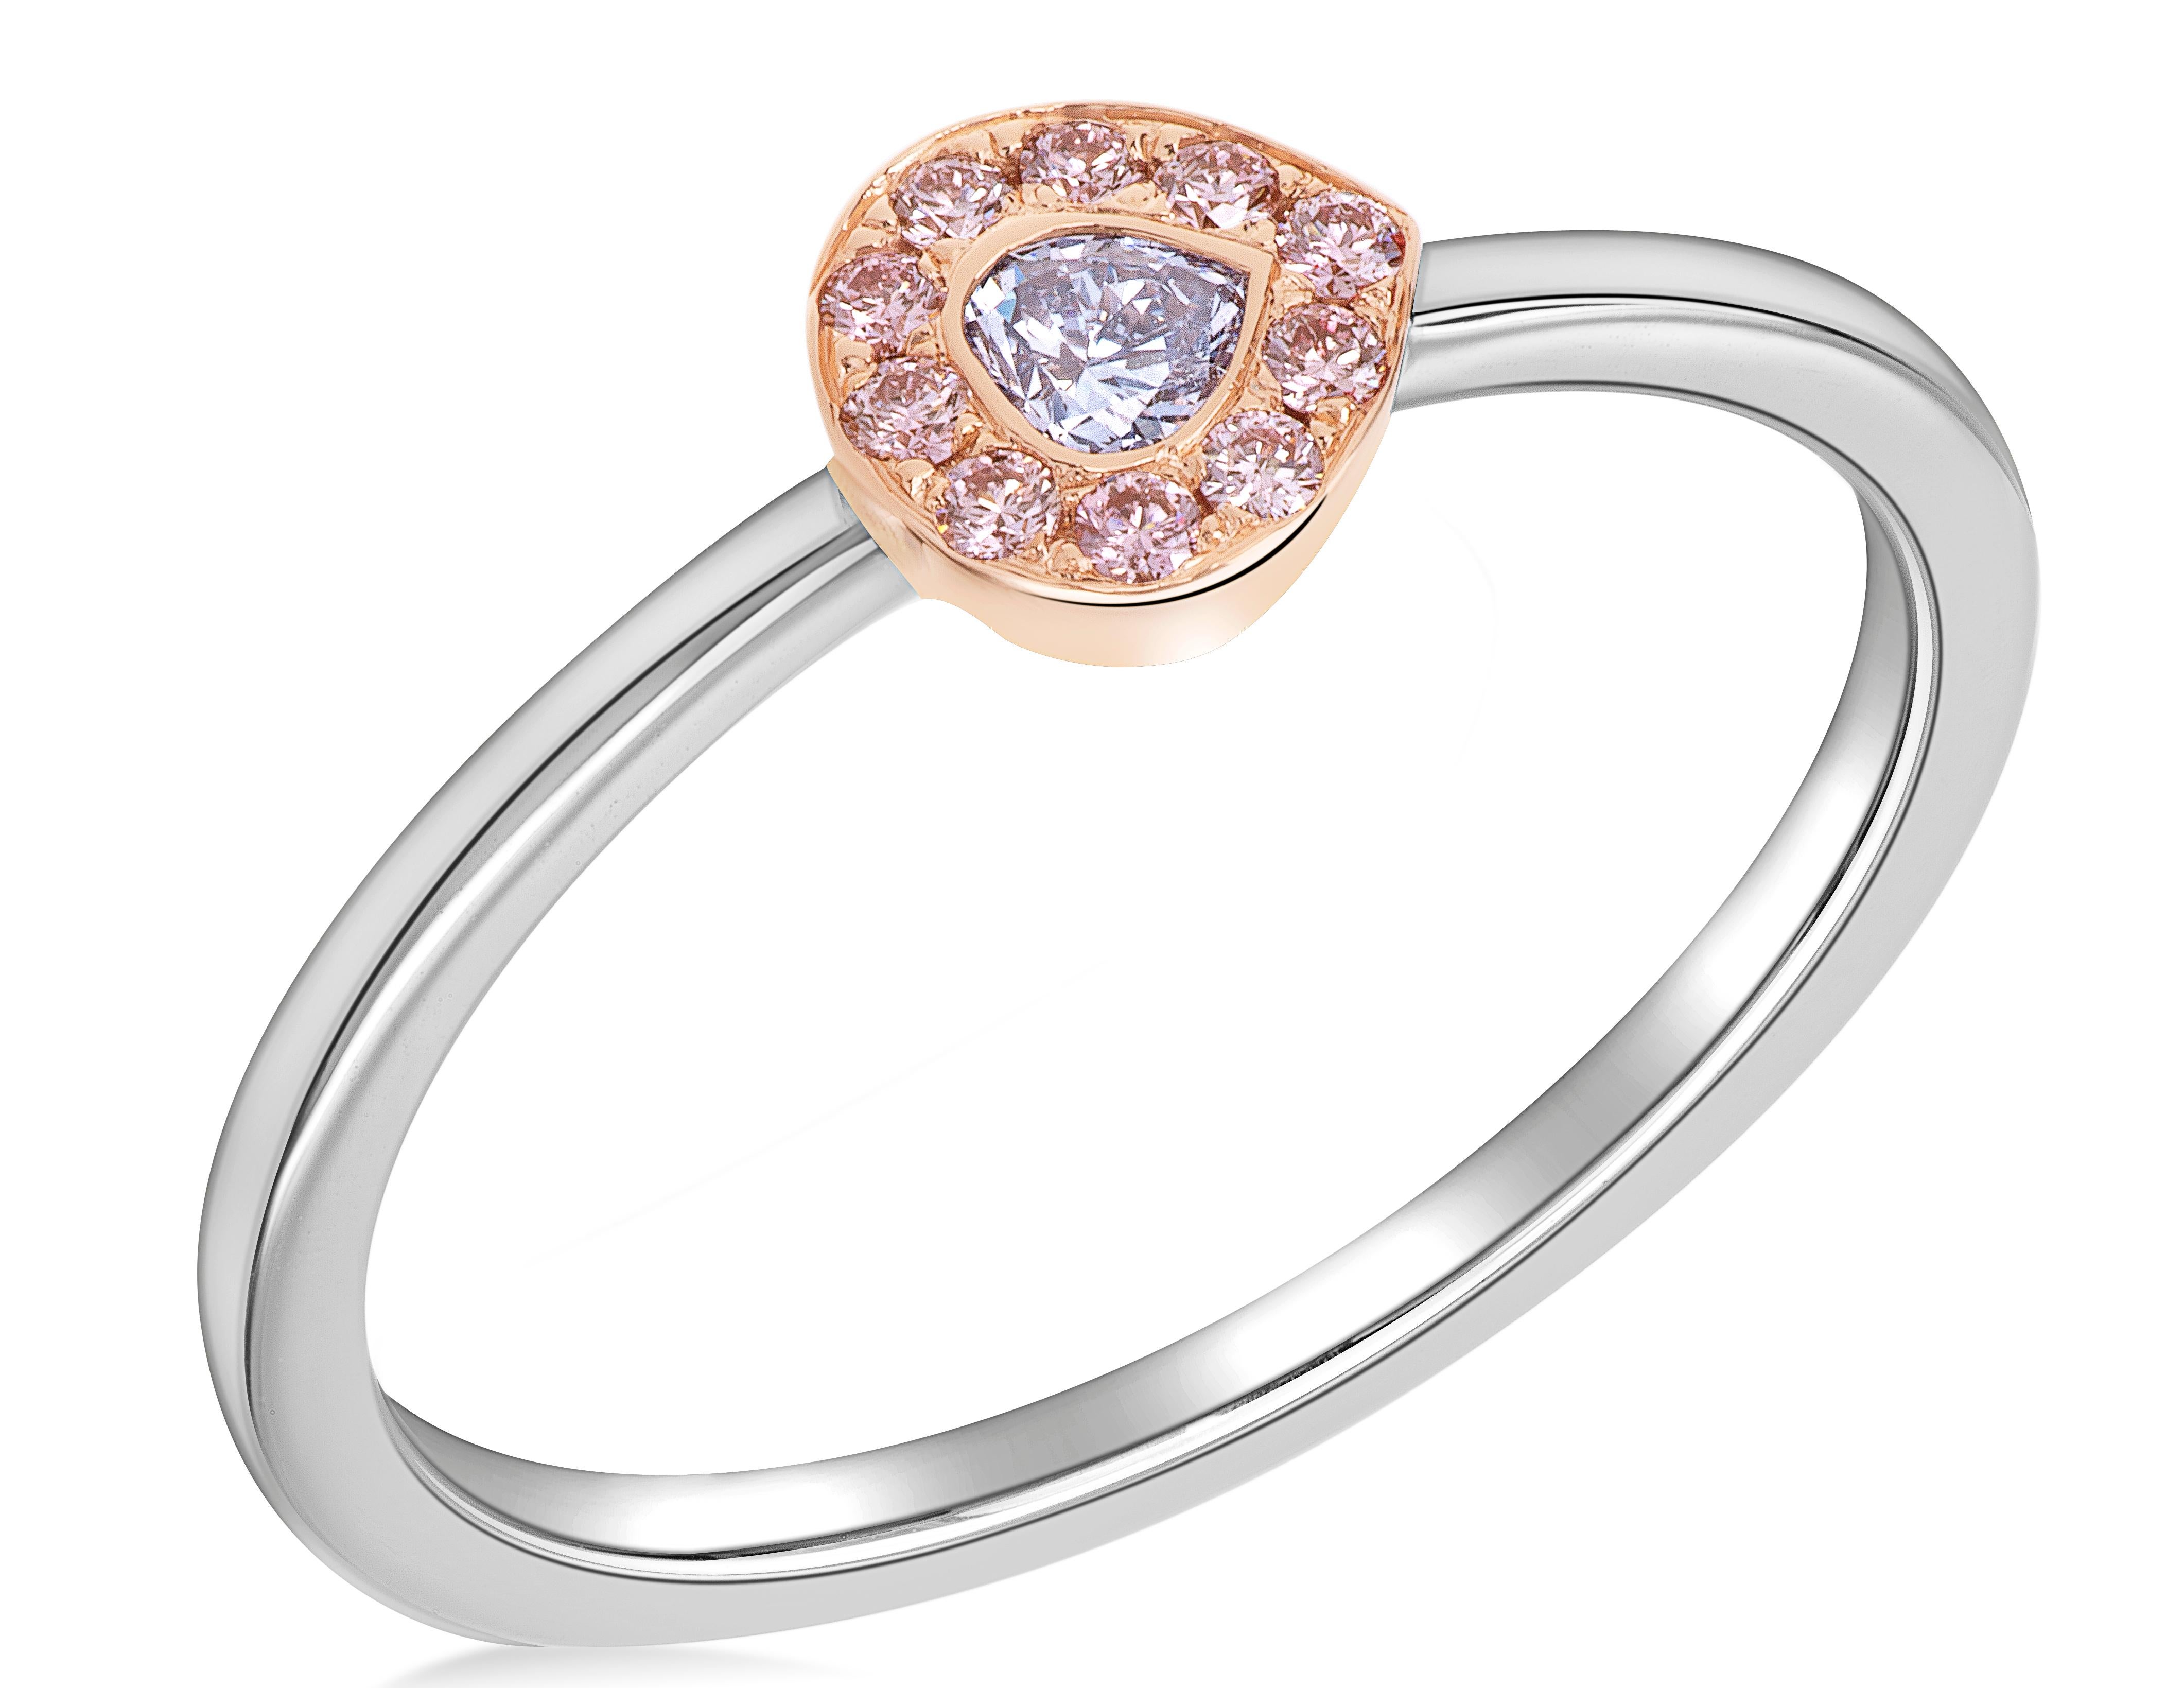 Indulge in the enchanting beauty of this stackable ring featuring a Modified Heart Shape, Fancy Gray Blue diamond with GIA #2211437497. The mesmerizing diamond takes center stage, captivating with its unique color and shape.

Accompanying the fancy